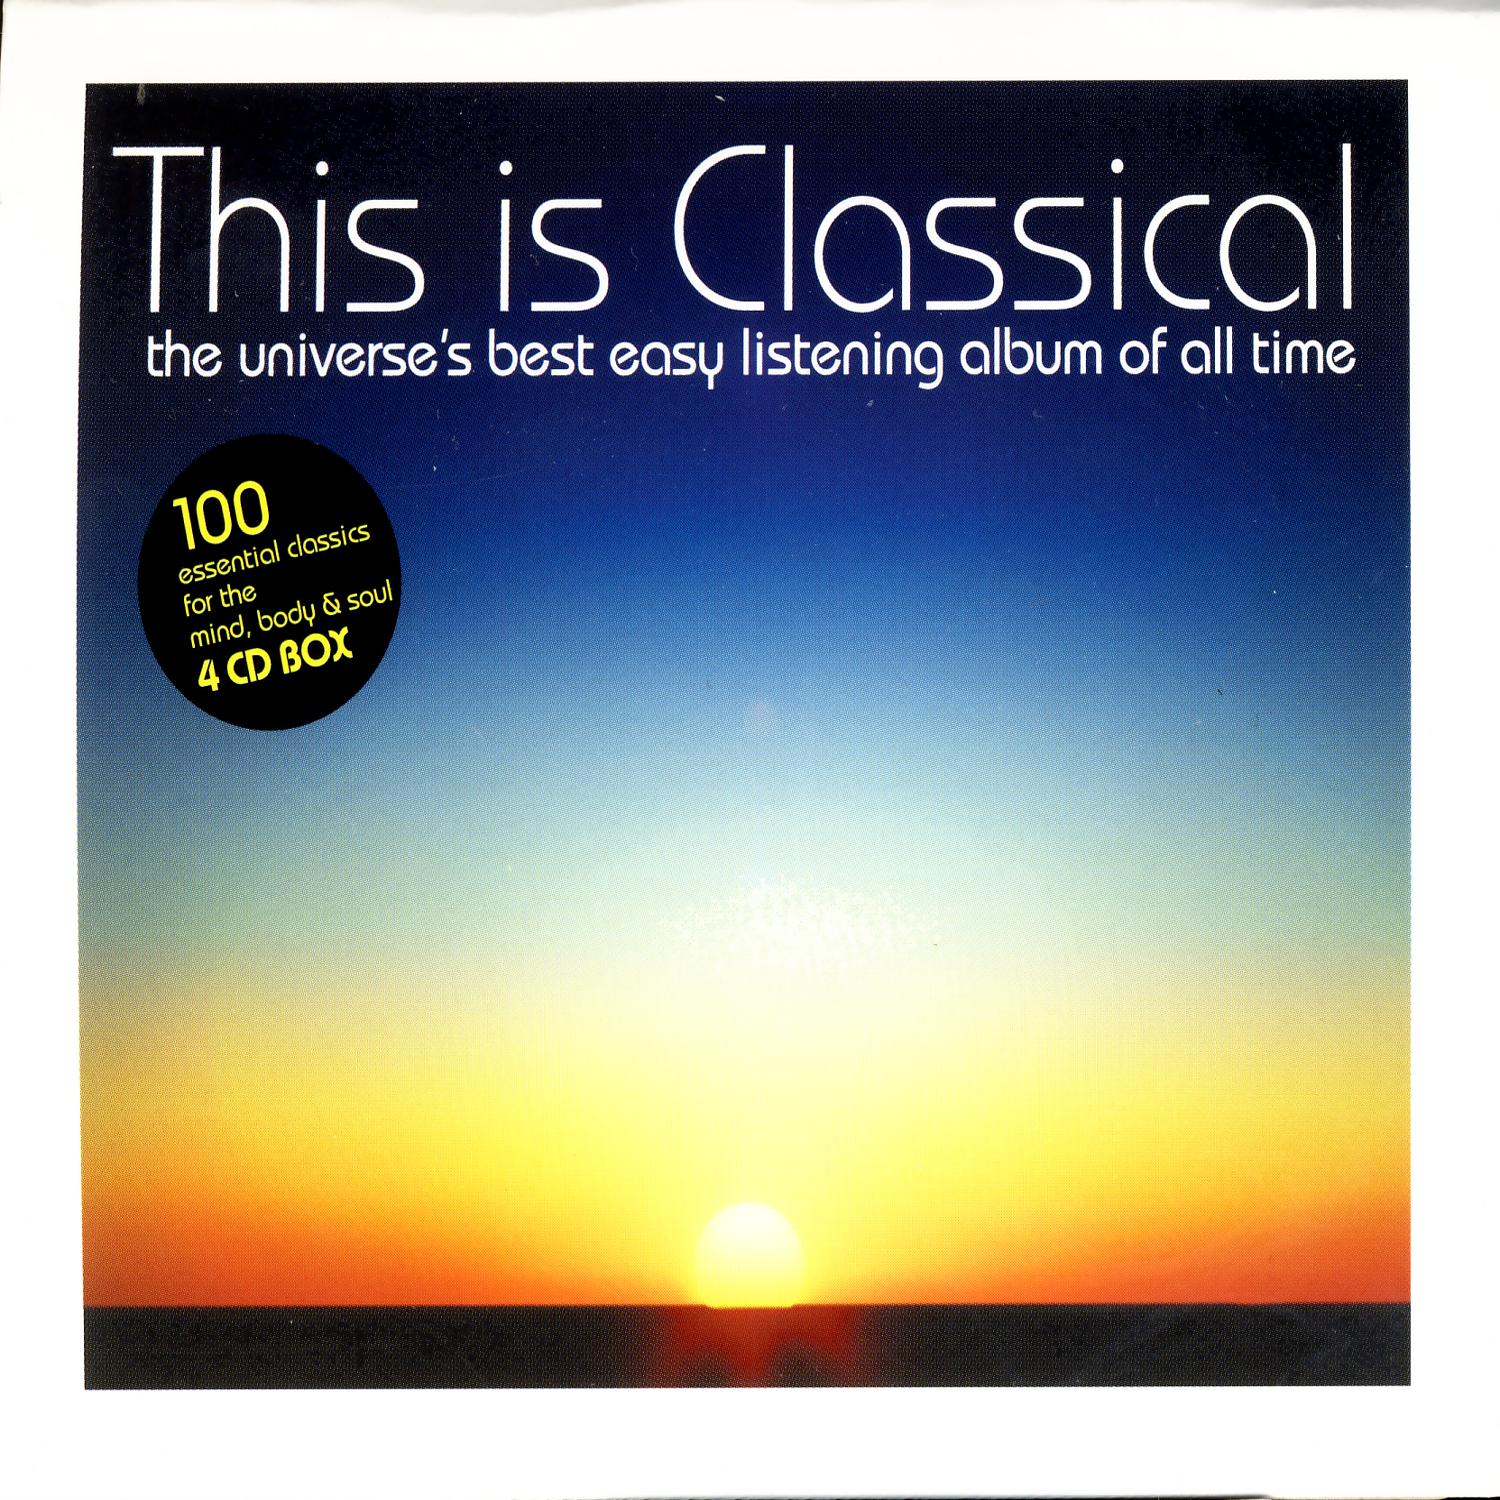 This Is Classical - The Universe's Best Easy Listening Album Of All Time